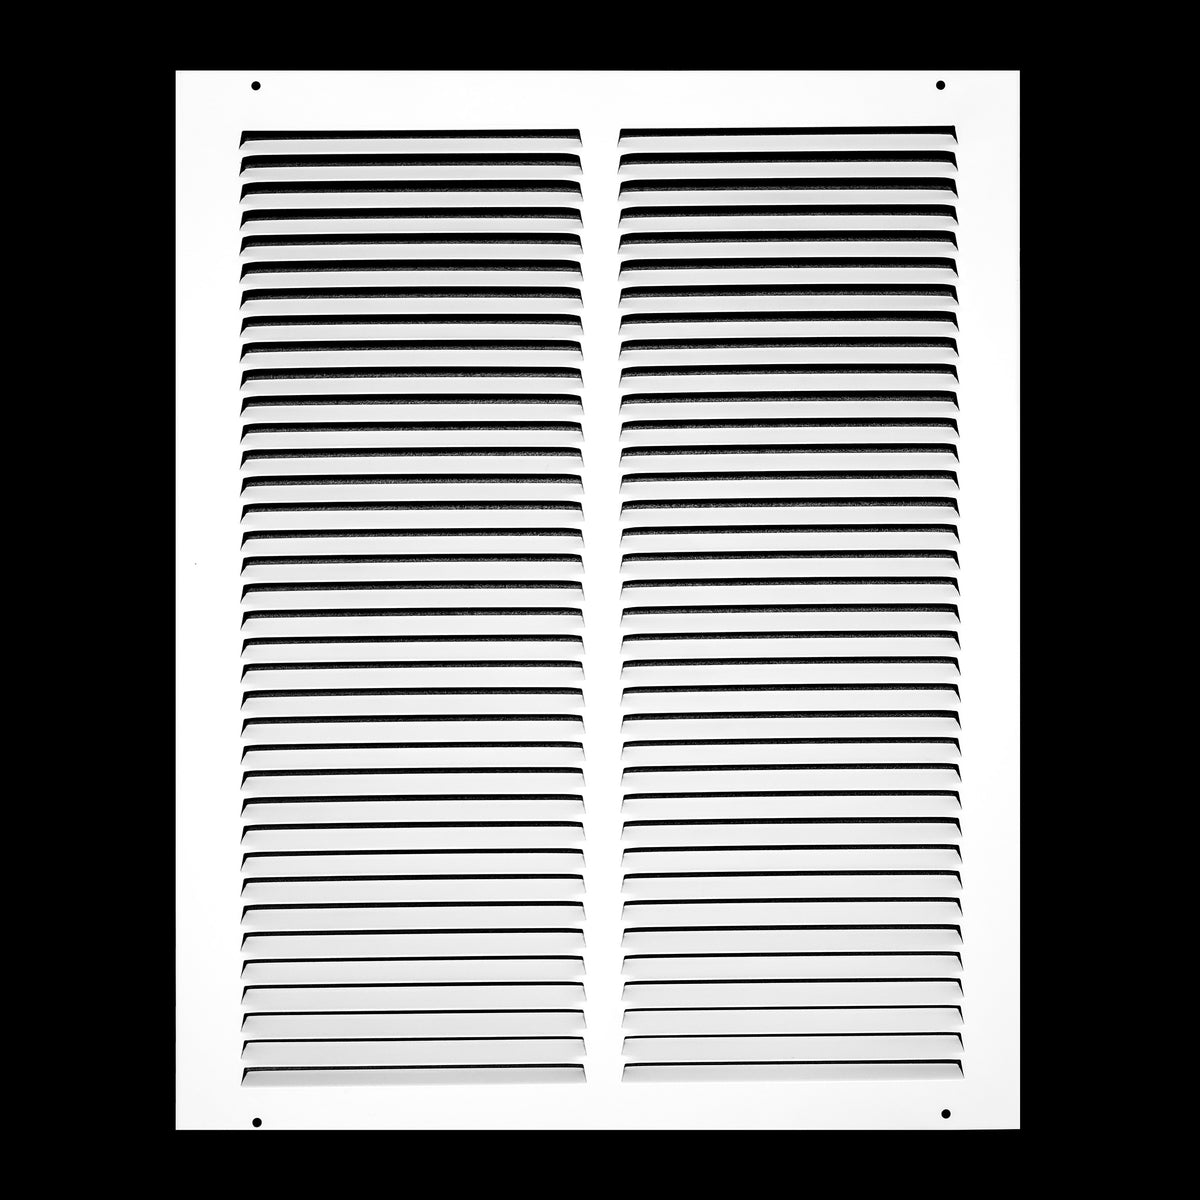 airgrilles 14" x 18" duct opening  -  hd steel return air grille for sidewall and ceiling 7hnd-flt-rg-wh-14x18 038775640763 - 1